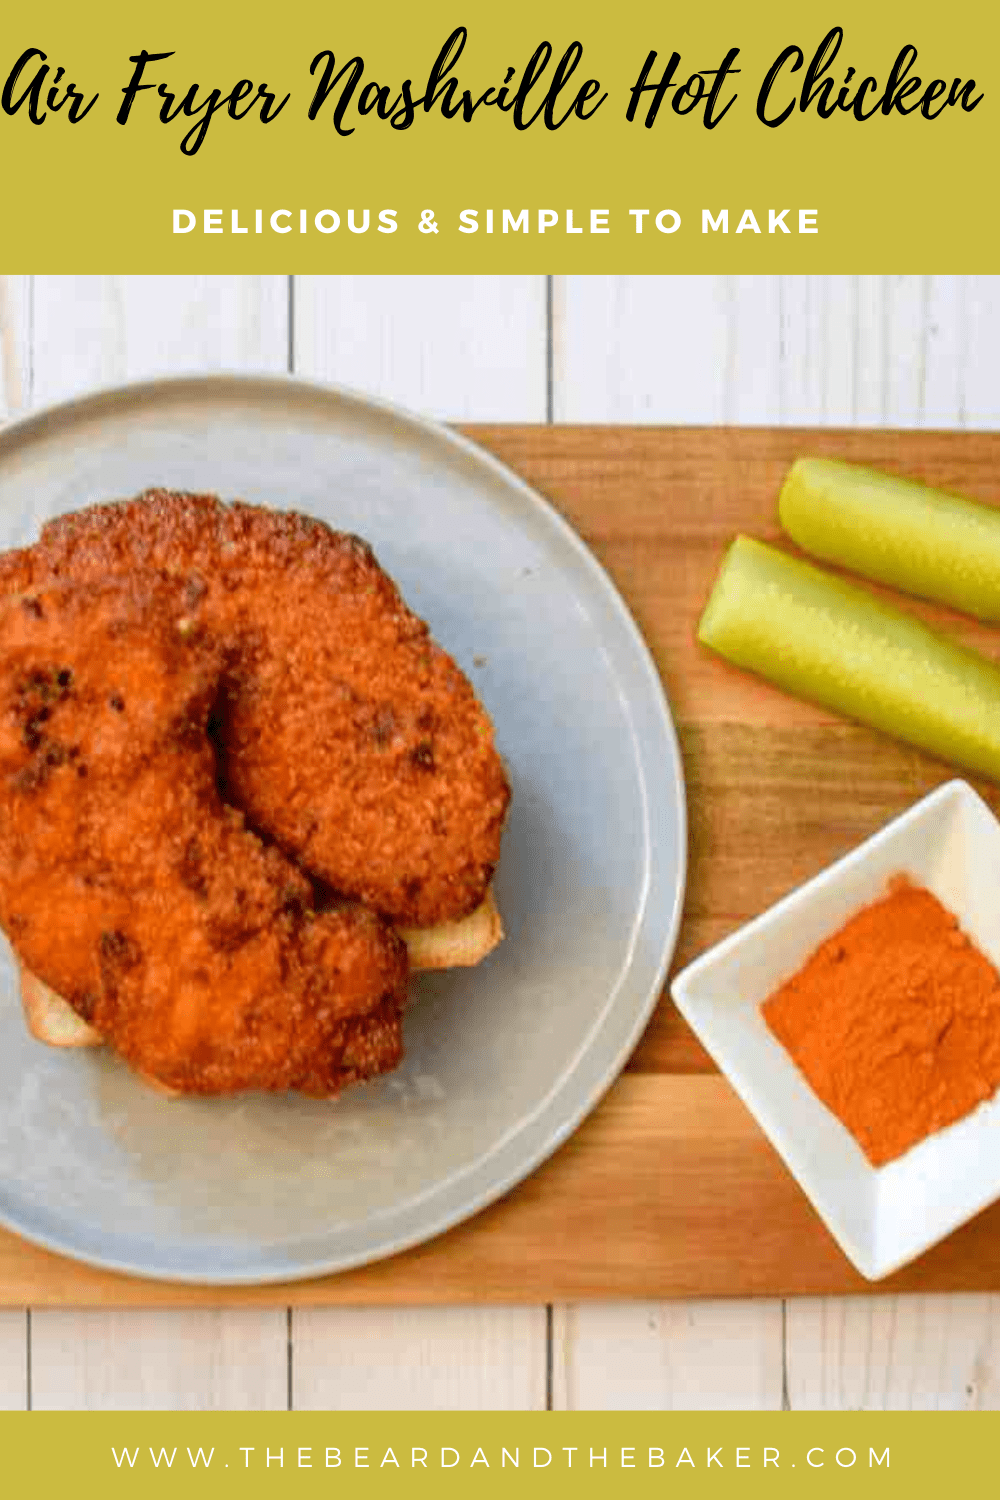 Graphic that says "Air Fryer Nashville Hot Chicken - Delicious & Simple to Make" with a picture of crispy chicken on a grey plate.